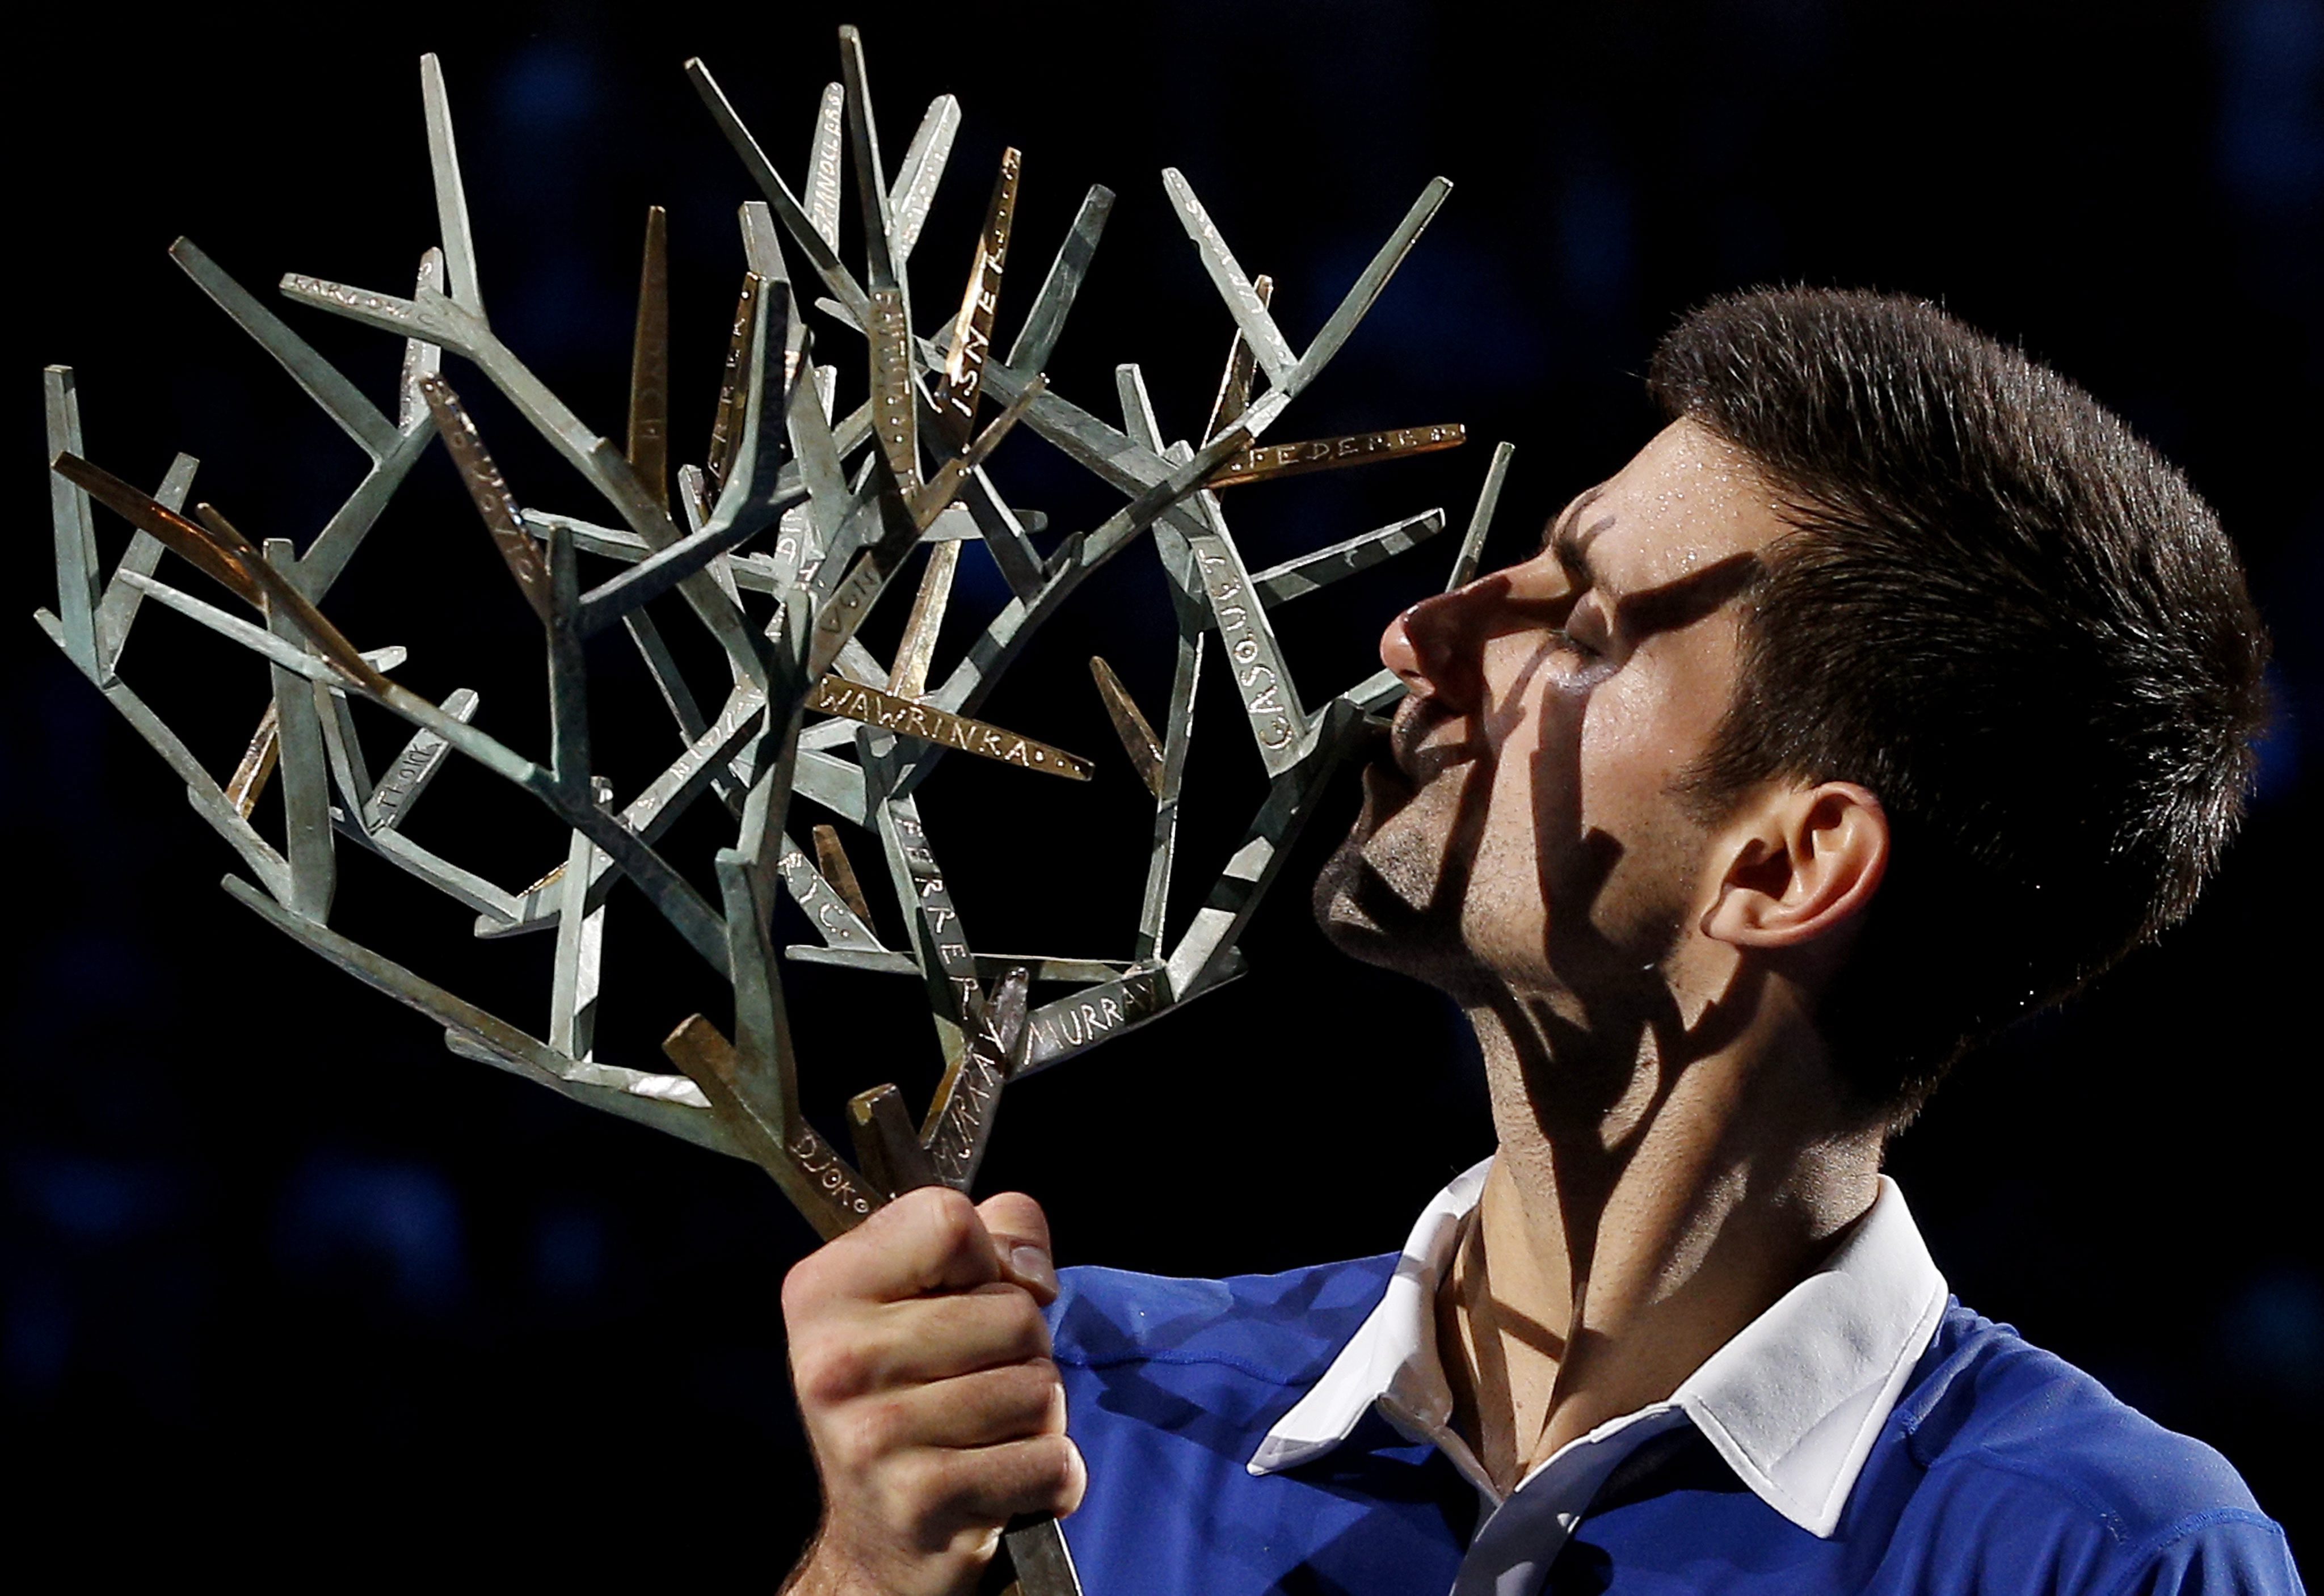 epa05016980 Novak Djokovic of Serbia celebrates with the trophy after winning the final match against Andy Murray of Great Britain at the BNP Paribas 2015 Masters tennis tournament in Paris, France, 08 November 2015. EPA/YOAN VALAT ORG XMIT: VAL122